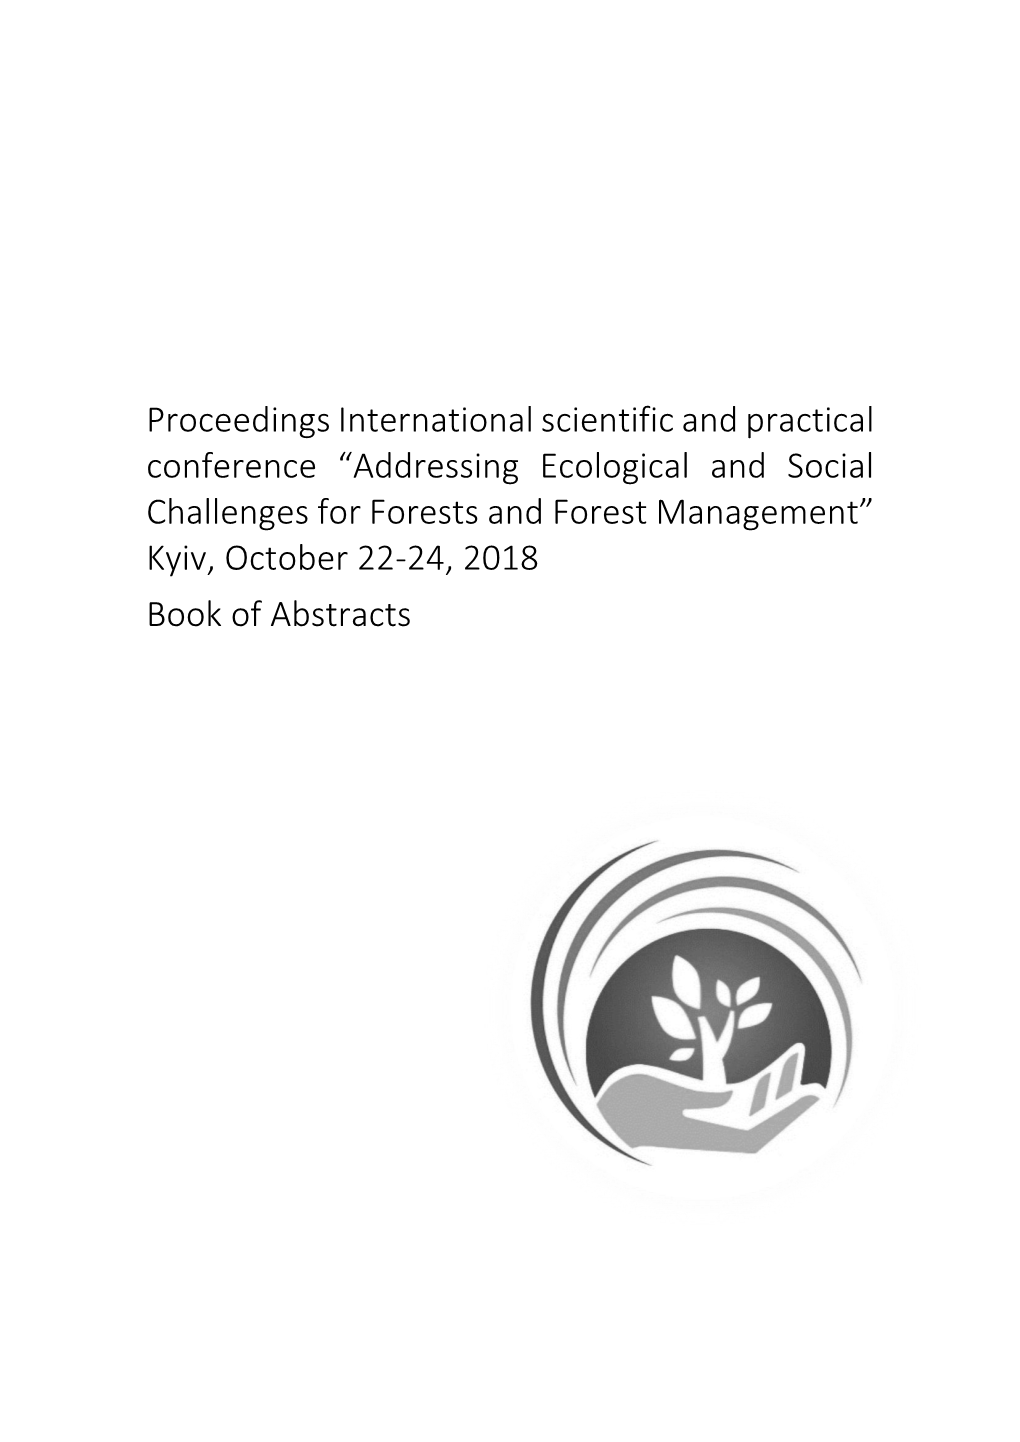 Addressing Ecological and Social Challenges for Forests and Forest Management” Kyiv, October 22-24, 2018 Book of Abstracts